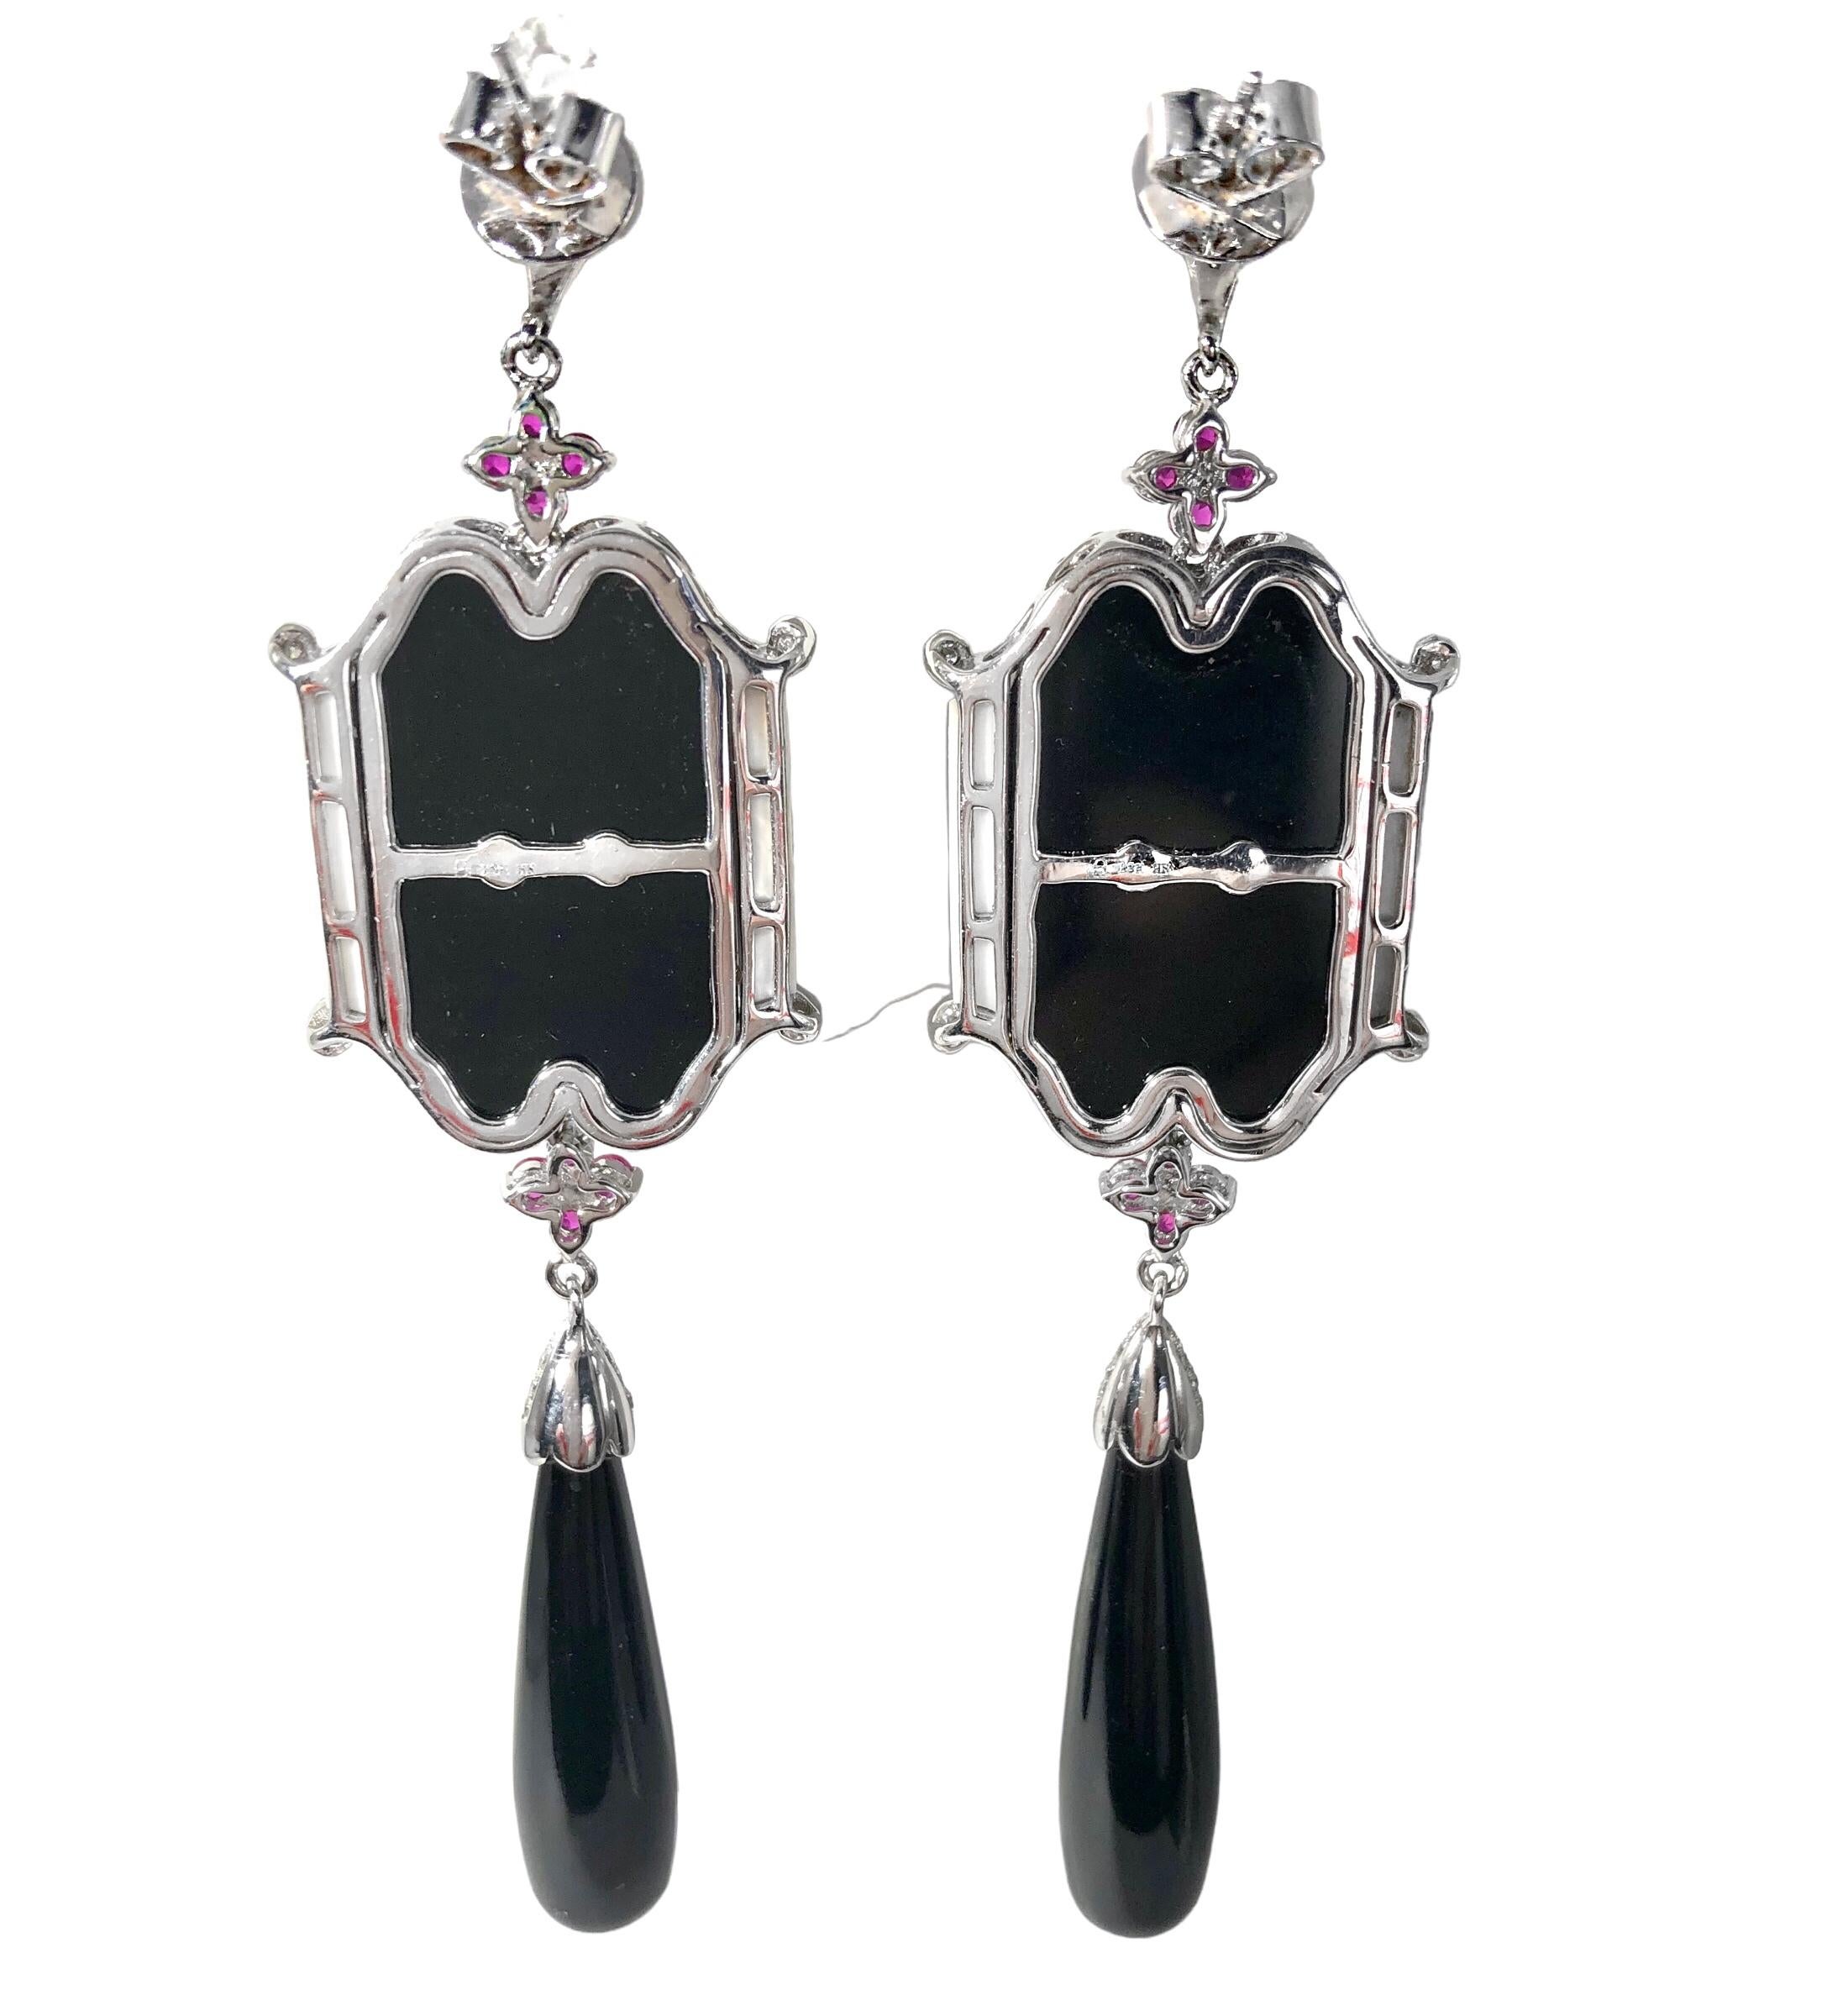 This dramatic and very large pair of Mid-20th Century Classical Victorian style earrings are not only gorgeous but are crafted to the highest standards of quality. Vivid rubies and high quality brilliant cut diamonds are set in all sections of the